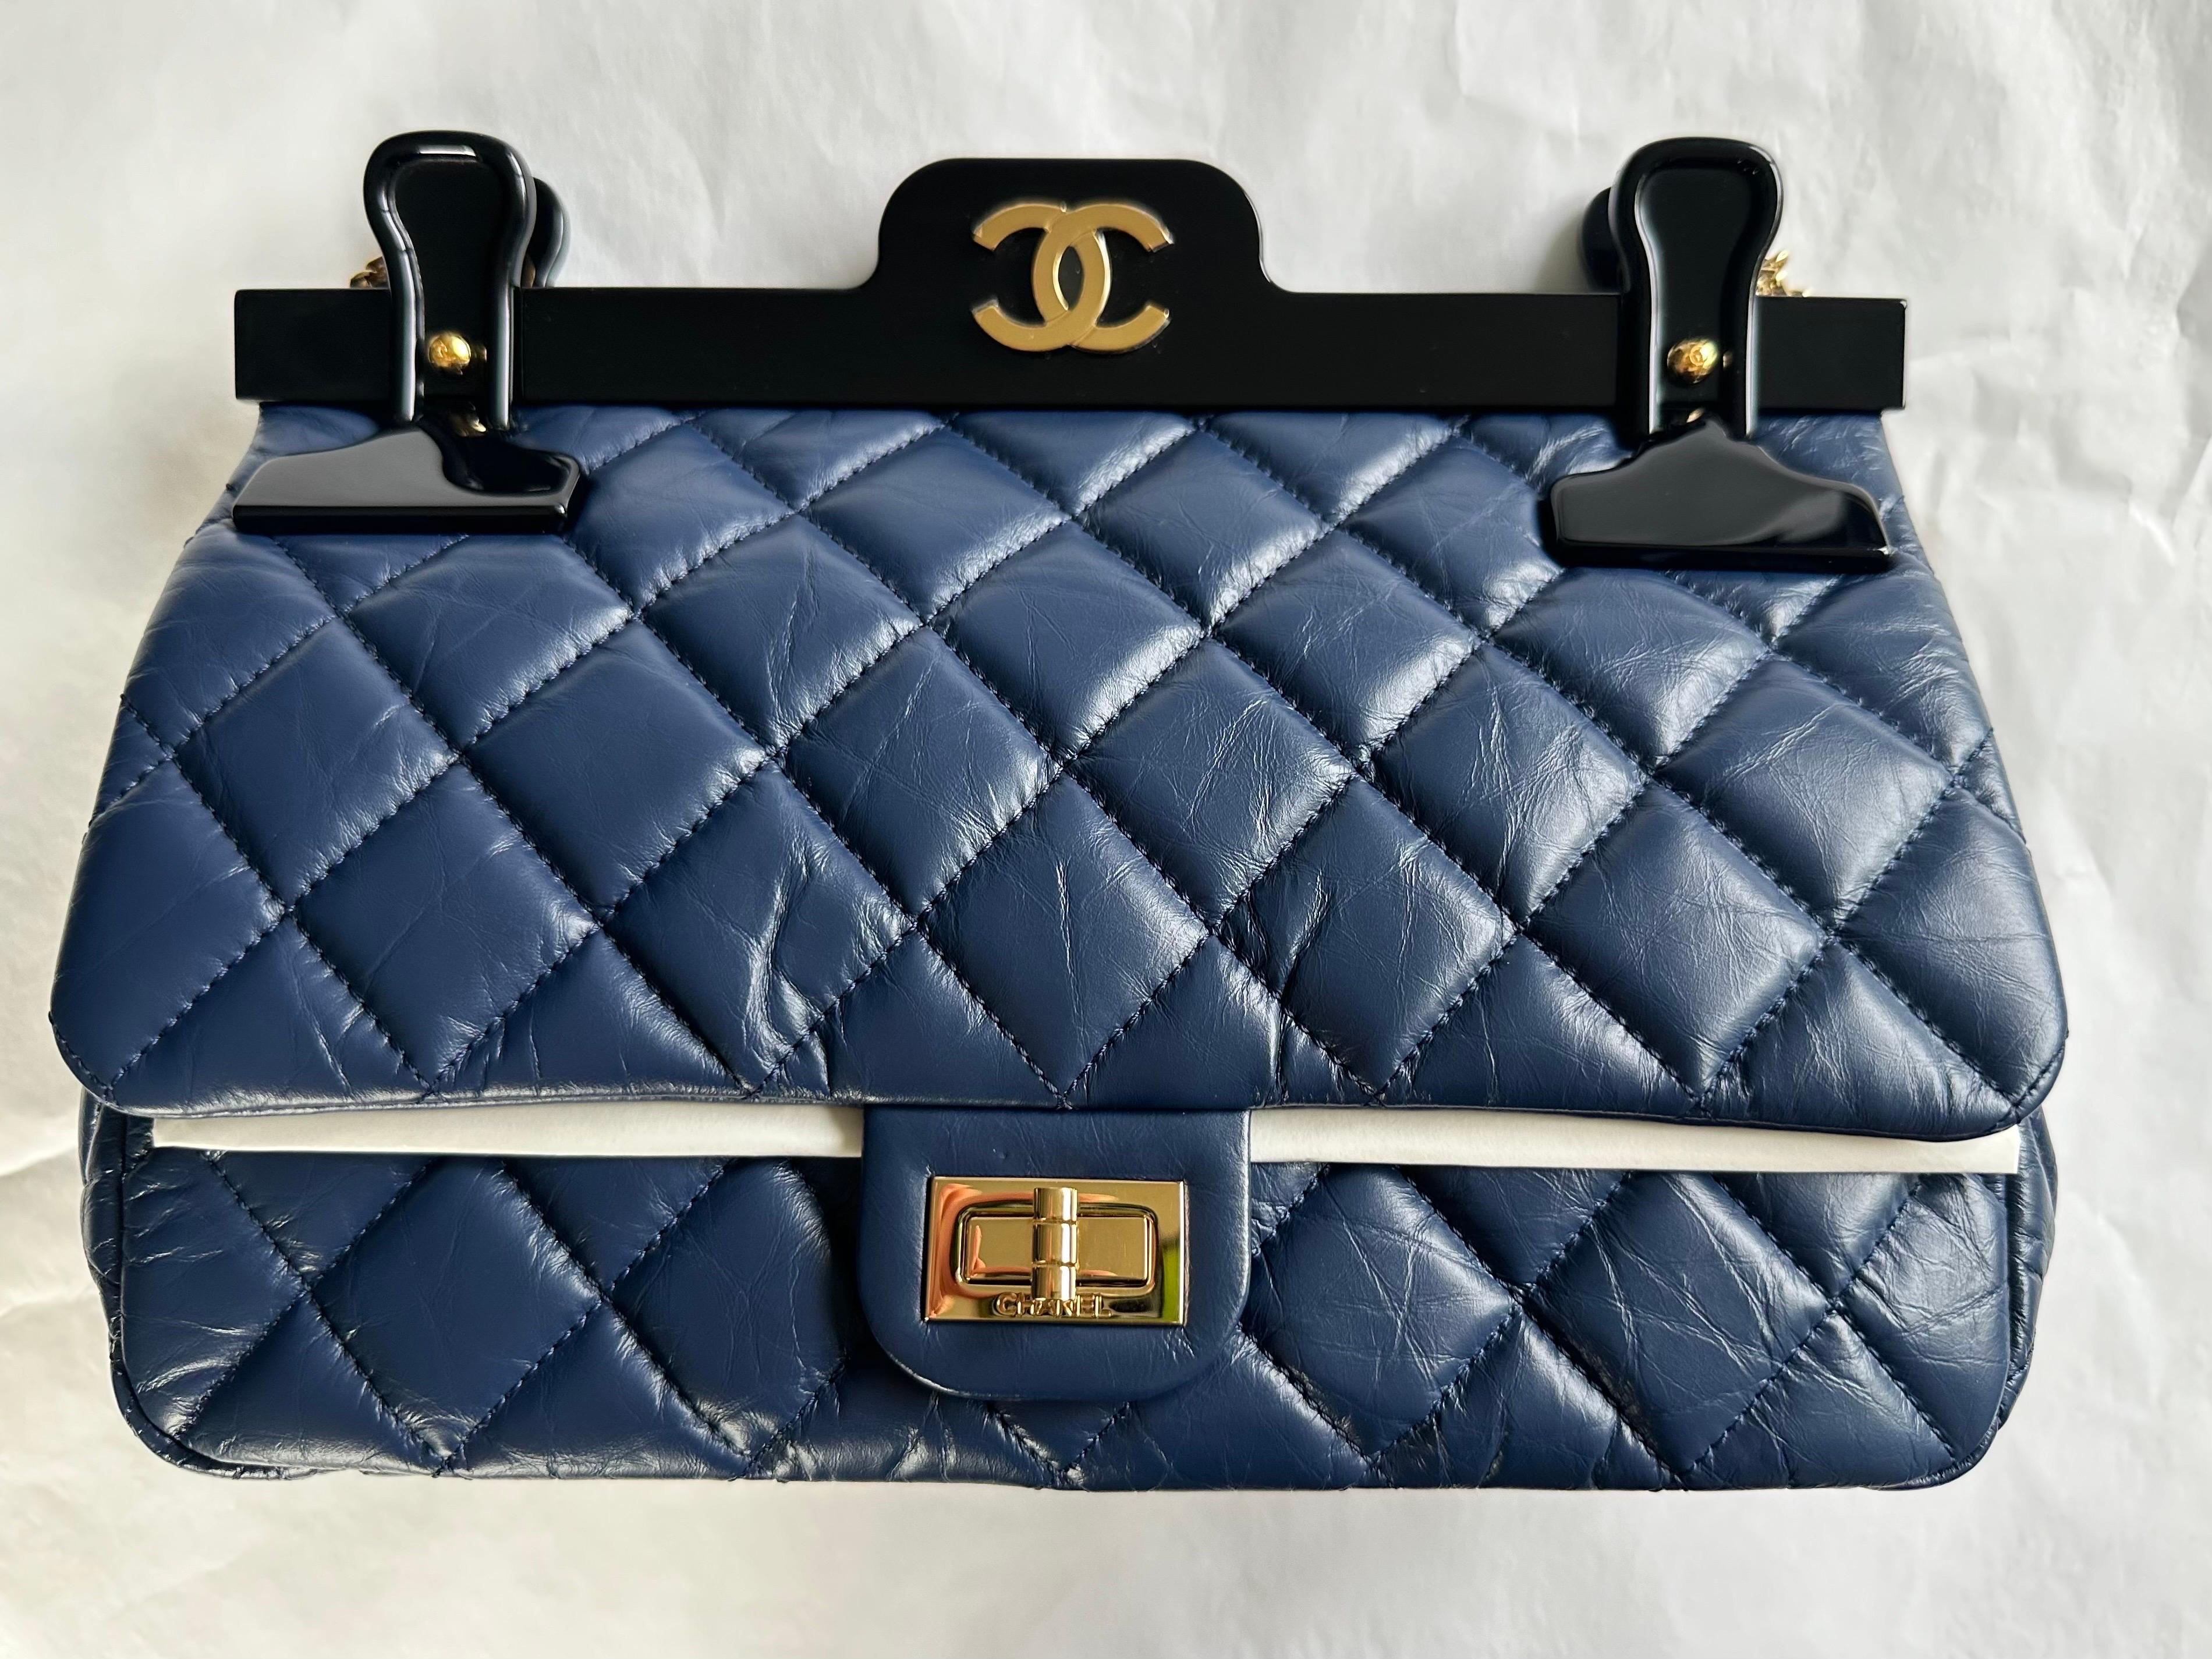 Chanel Limited Editiion 2.55 Reissue Rare Hanger Navy Blue Classic Flap Bag

Year: 2016
Gold tone hardware
Mademoiselle turn-lock closure
Navy blue calfskin
Reissue classic chain
Hanger detail with rear mirror
Classic back pocket
Burgundy leather